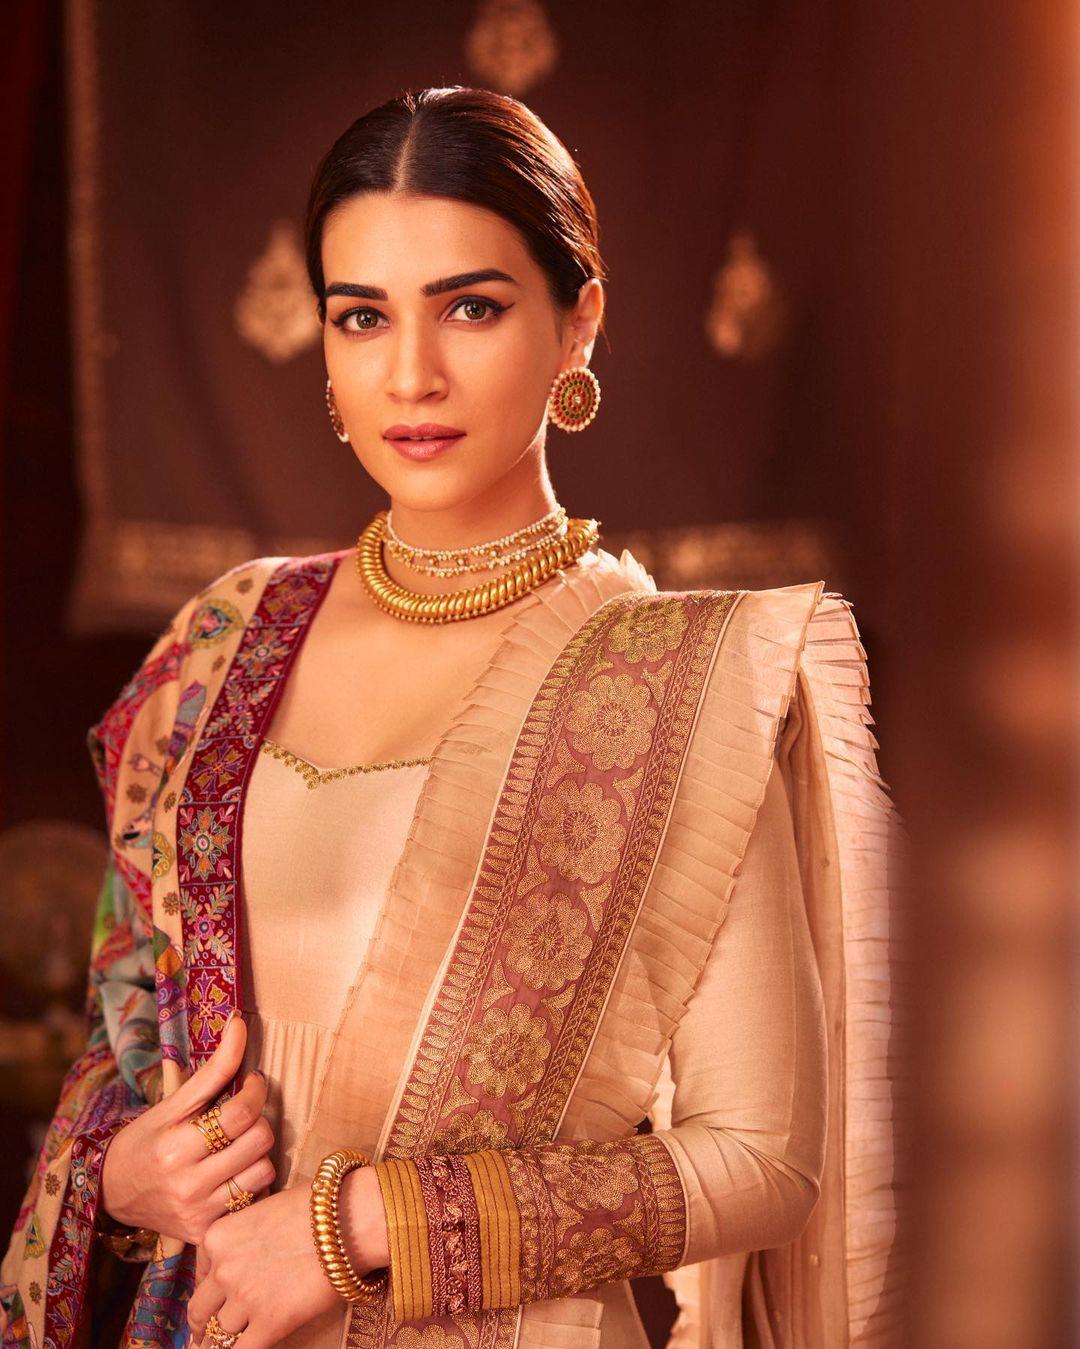 Kriti's look is nothing short of a vision, capturing the essence of grace and sophistication. Her choice of attire reflects her ability to blend cultural heritage with contemporary fashion, making it a wonderful source of Raksha Bandhan style inspiration for those who wish to celebrate tradition with a touch of elegance and a nod to timeless tales.